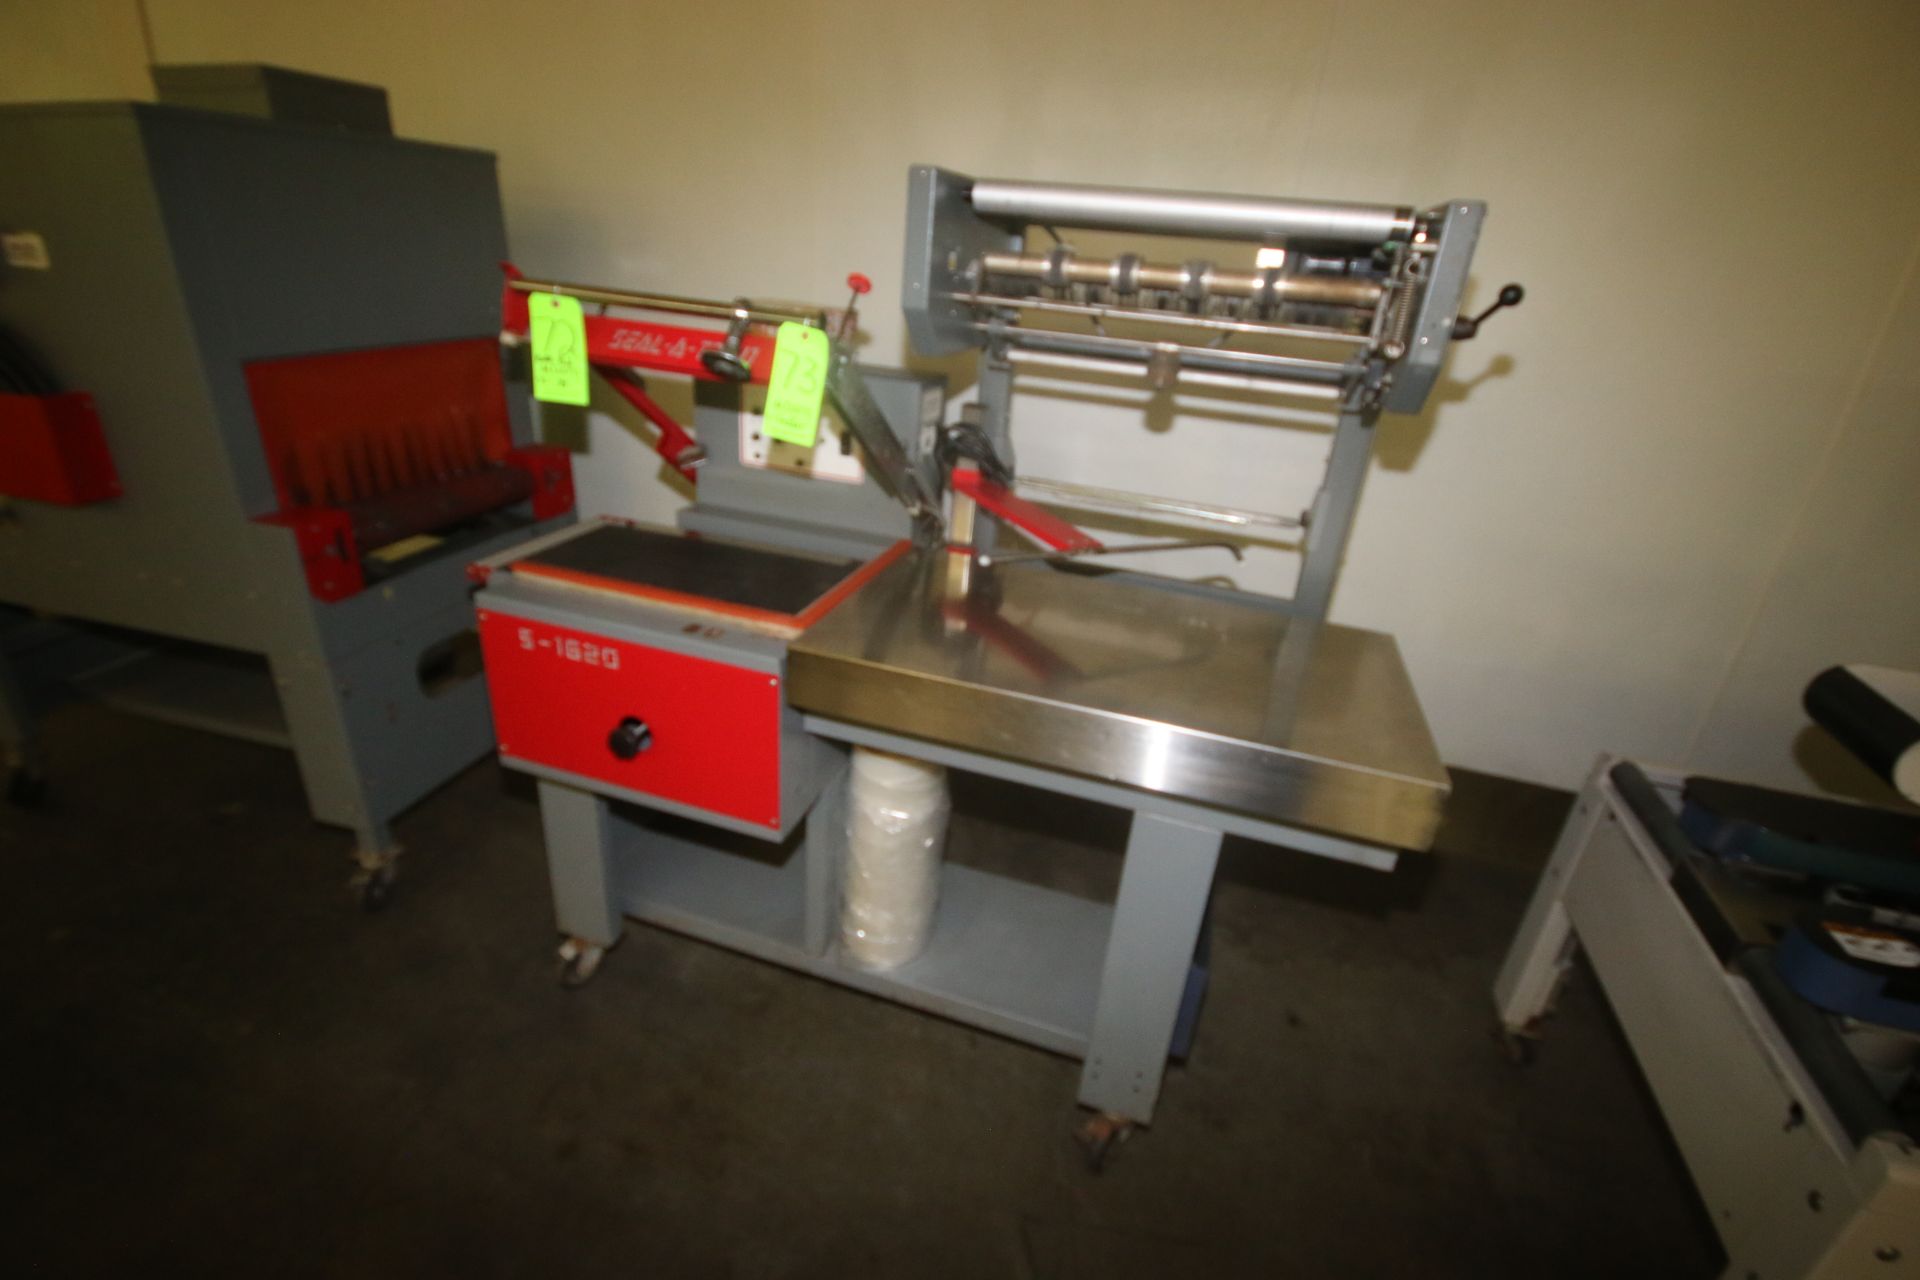 Seal-A-Tron L-Bar Sealer, M/N S-1620, S/N S16200422, 120 Volts, 1 Phase, Mounted on Portable